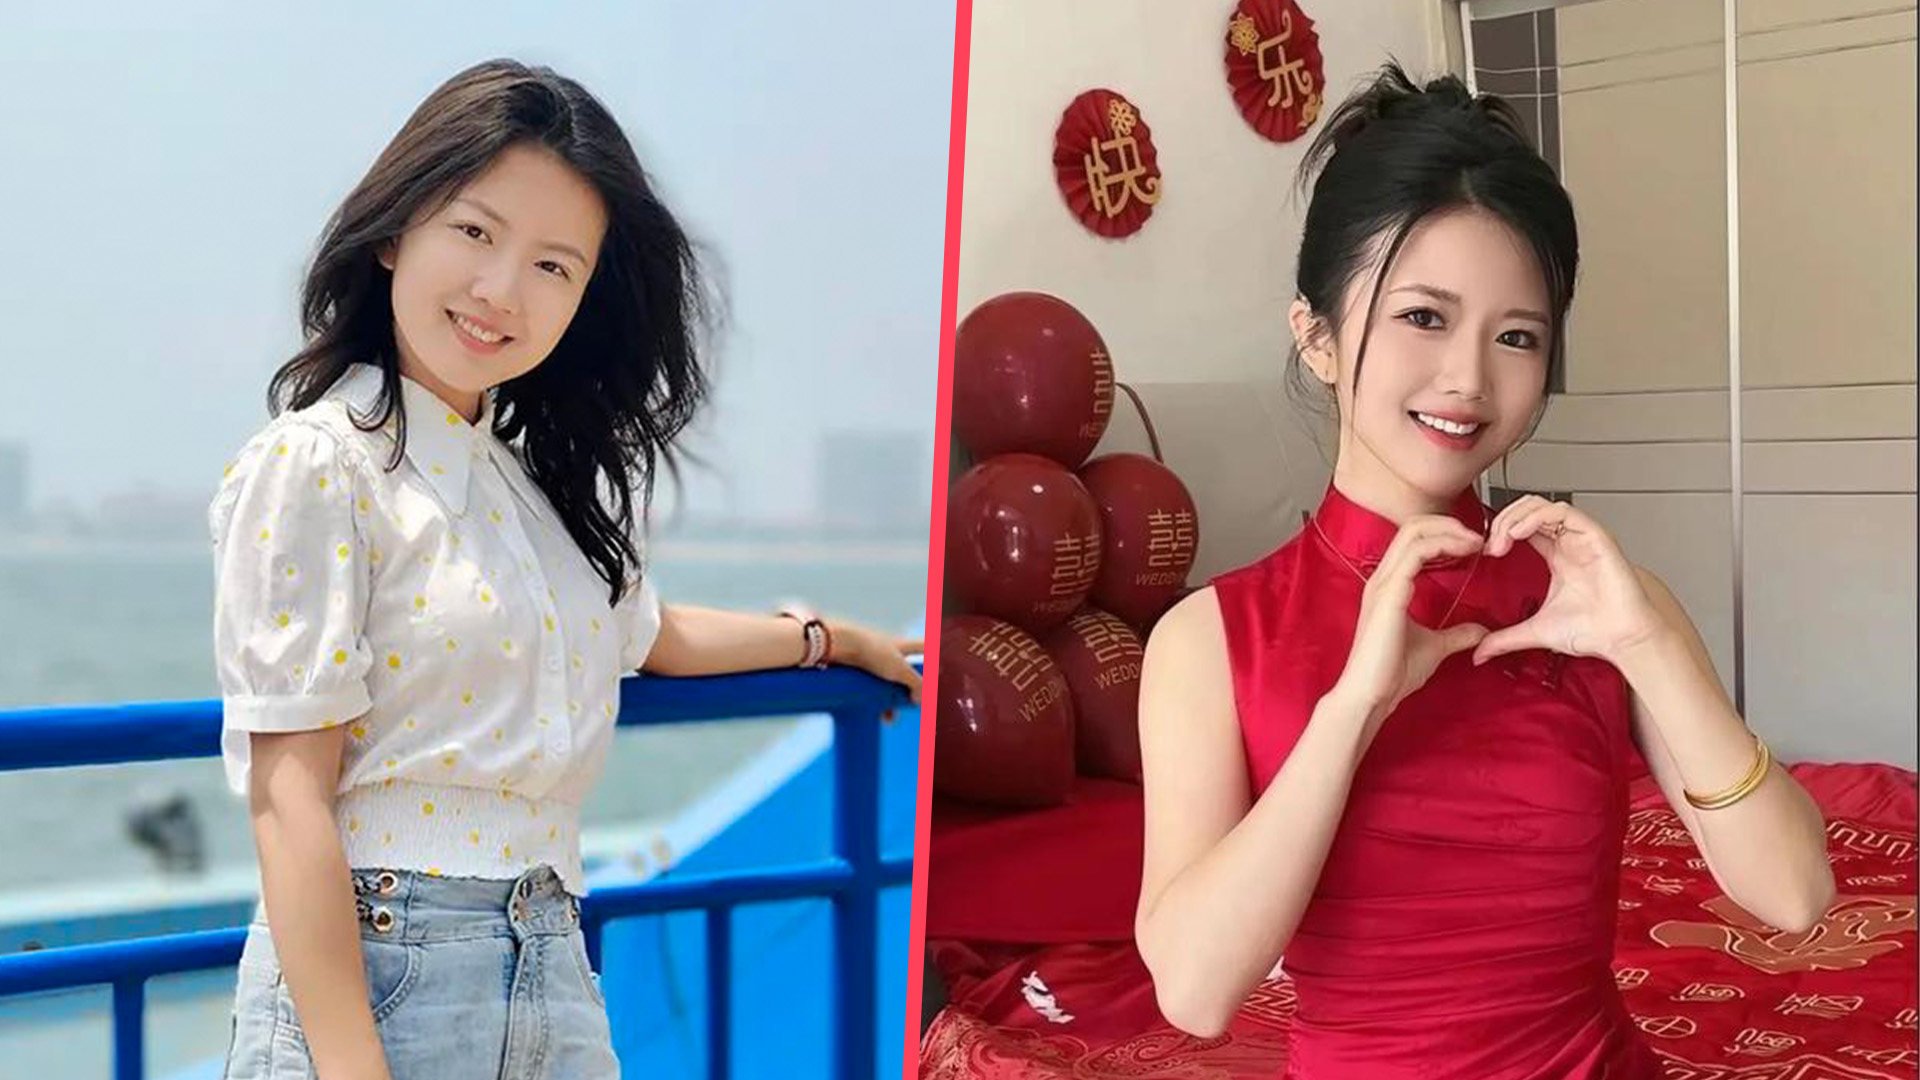 A high-achieving deaf woman in China who was voted one of the country’s most inspiring people has delighted mainland social media with the news that she is getting married. Photo: SCMP composite/Douyin/QQ.com